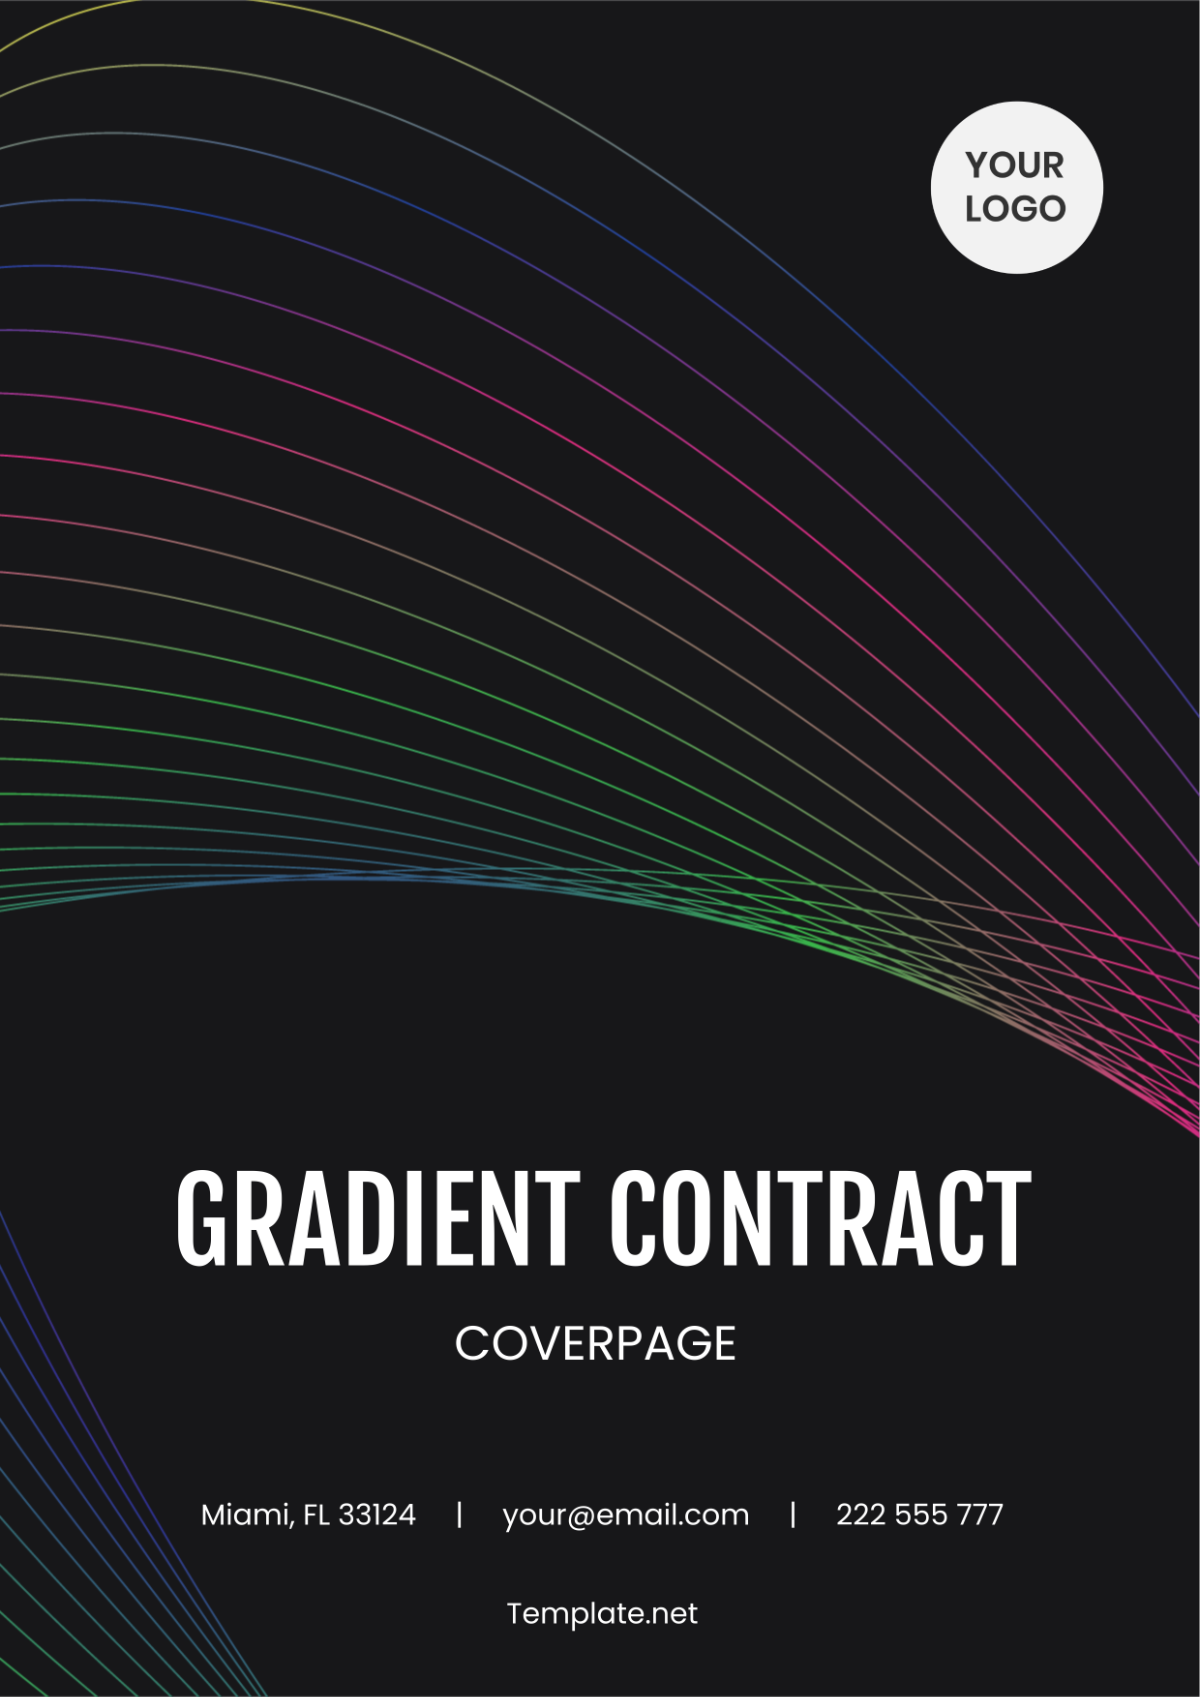 Free Gradient Contract Cover Page Template